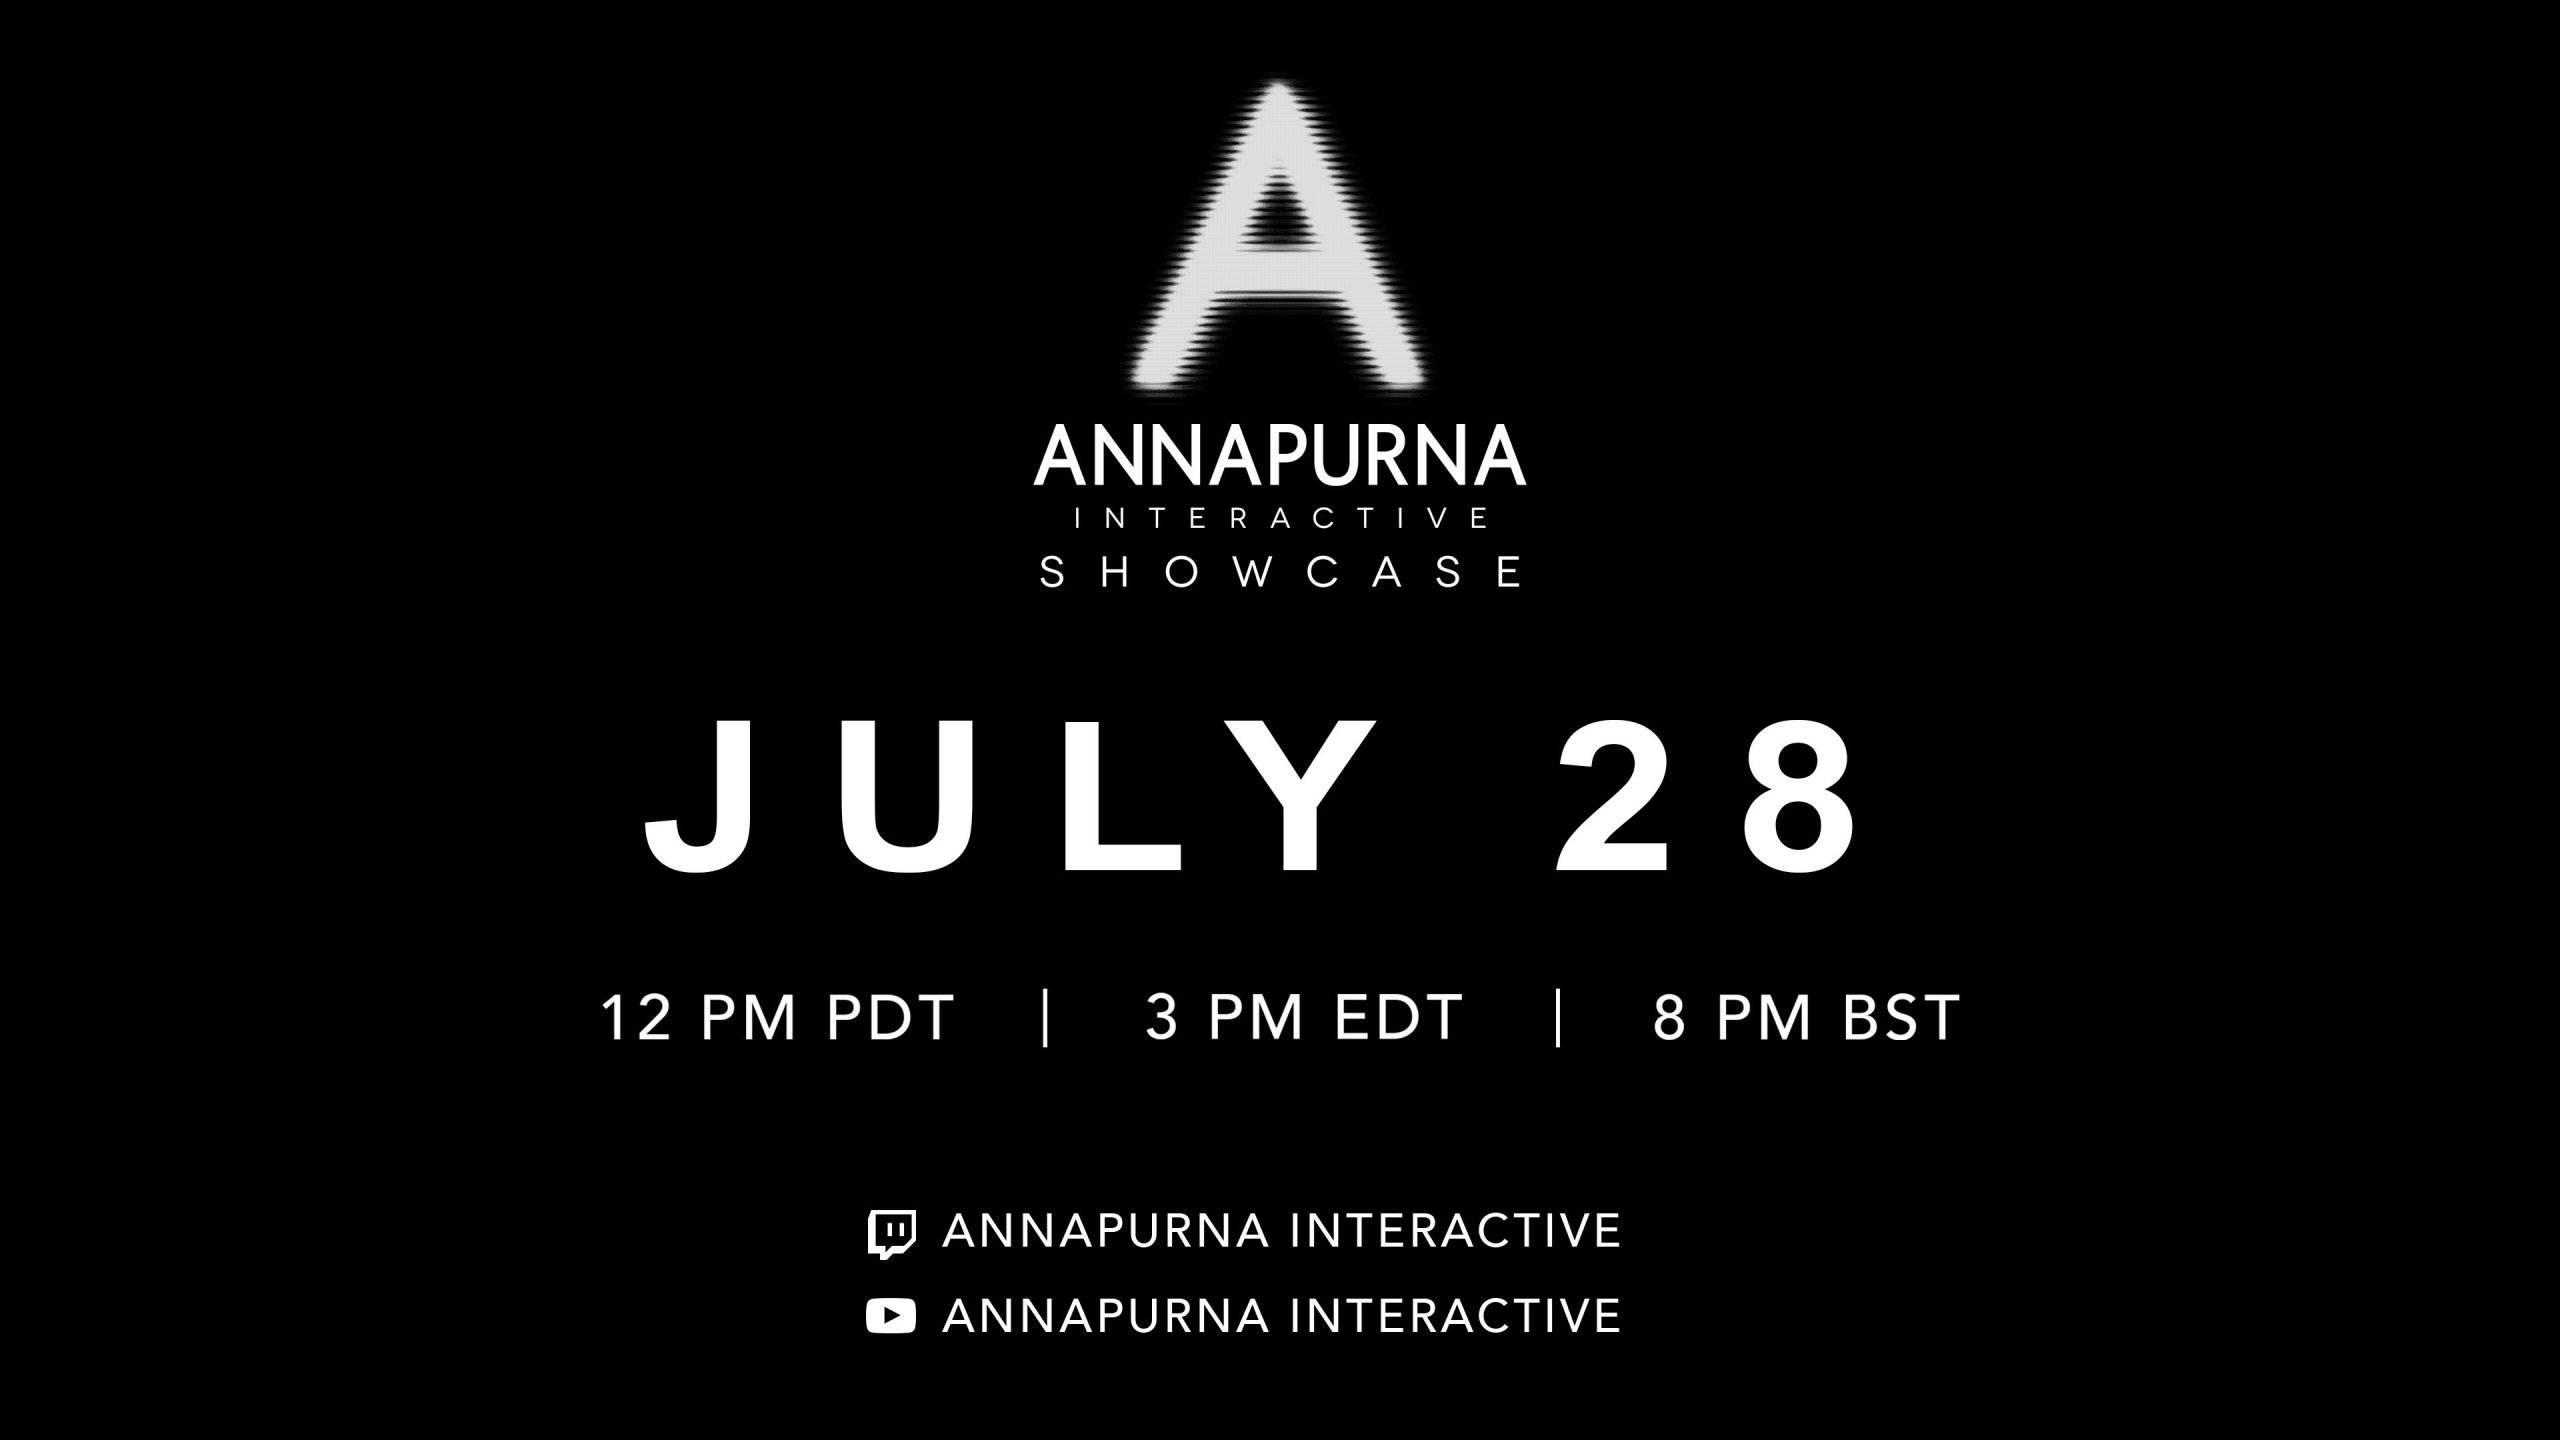 A promotional image for Annapurna Interactive Showcase, happening on July 28 at 3 p.m. EDT.